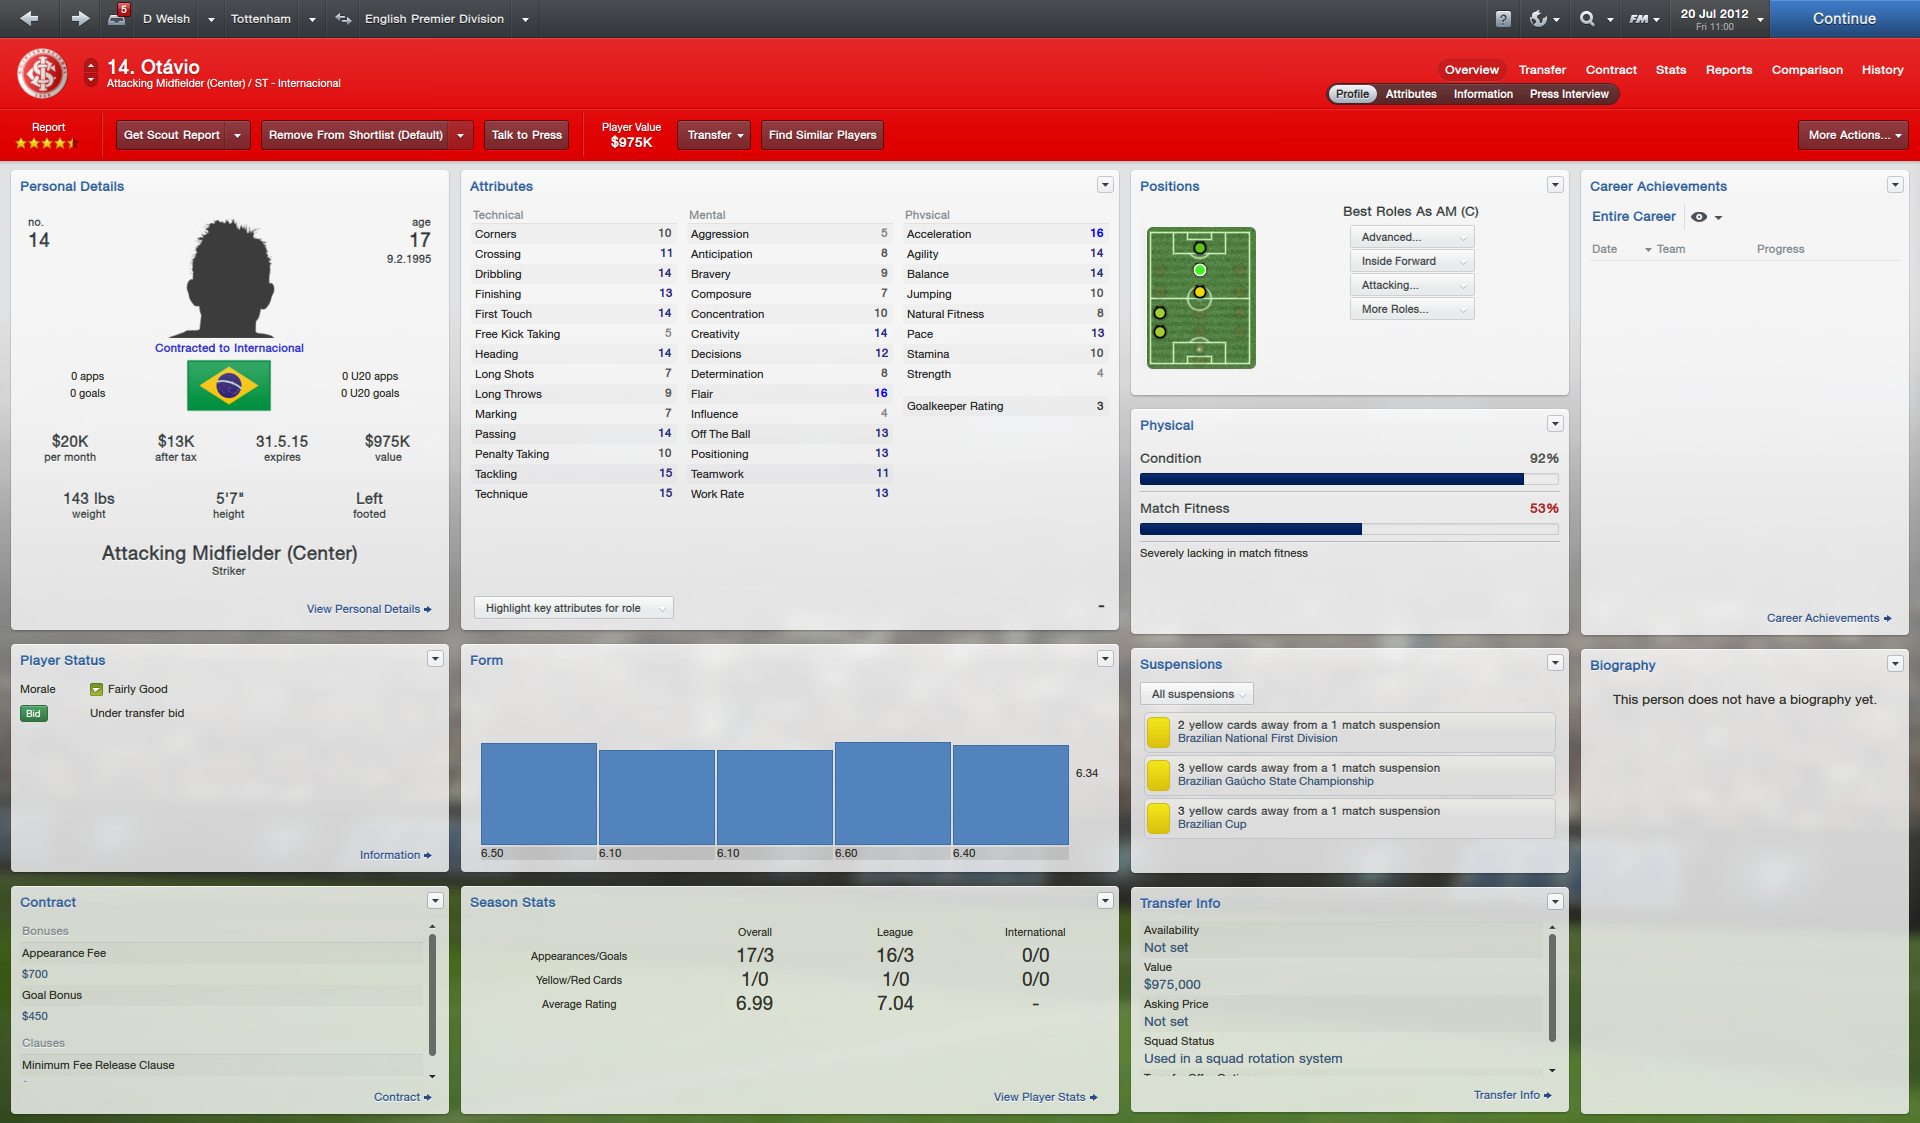 Football Manager 2013 Pics, Video Game Collection